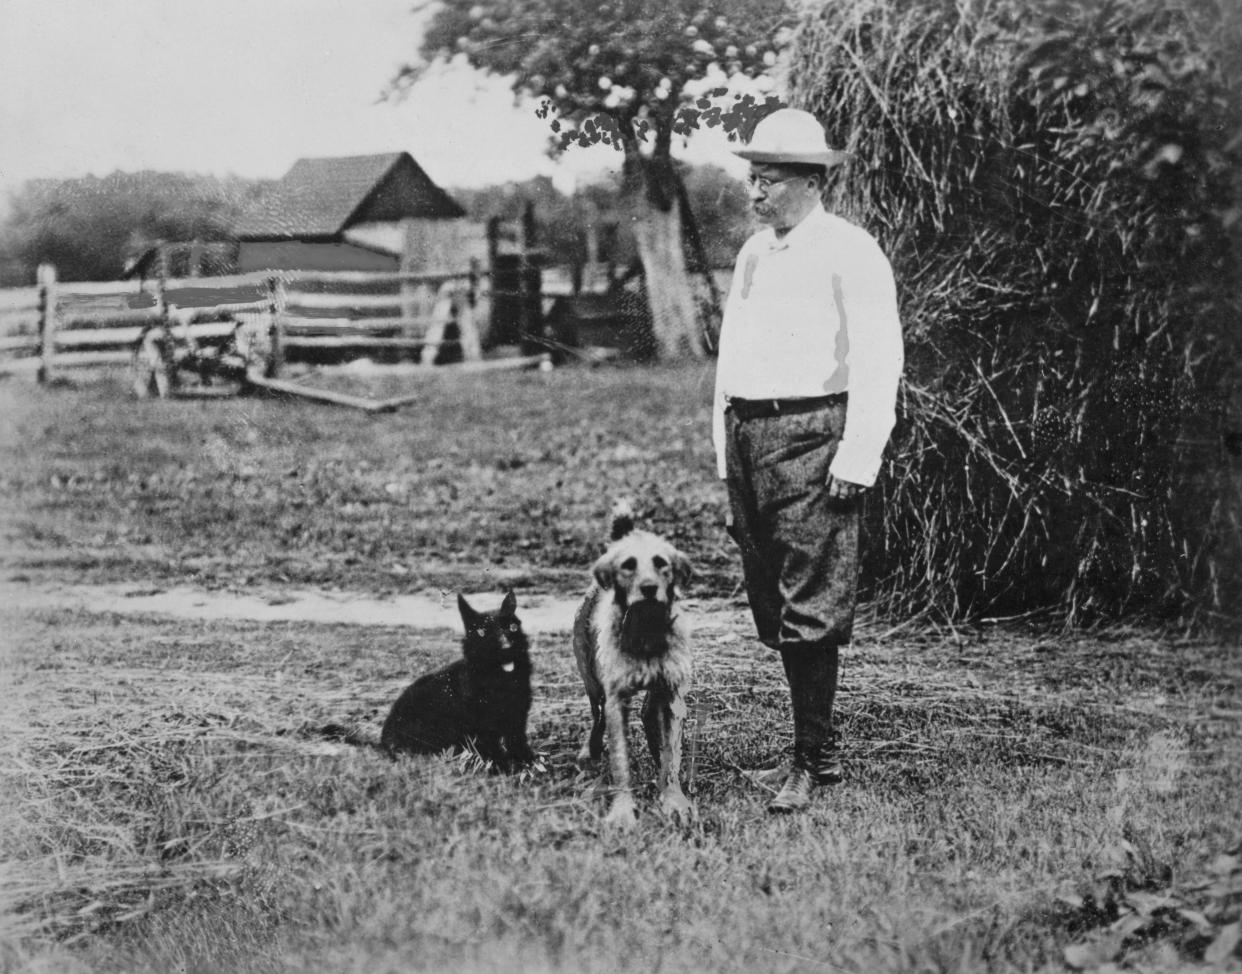 Theodore Roosevelt, 26th President of the United States, with his dogs at a farm, 1905. (Getty Images)